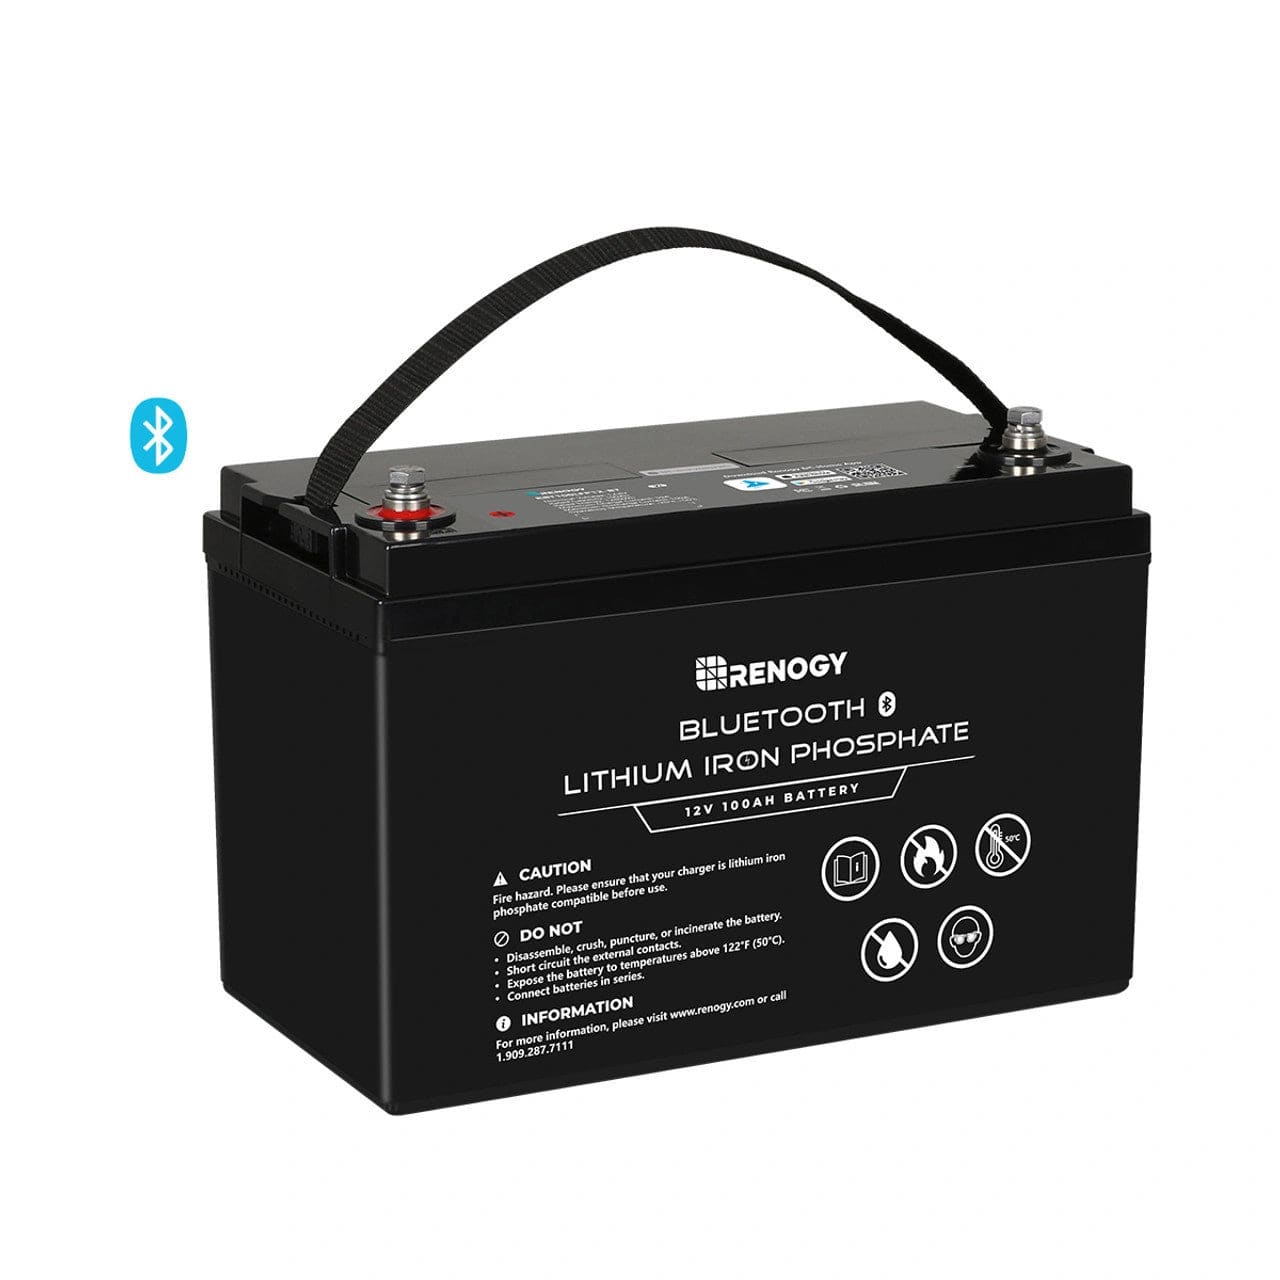 Renogy 12V 100Ah Lithium Iron Phosphate Battery w/ Bluetooth Renogy Battery Only Batteries